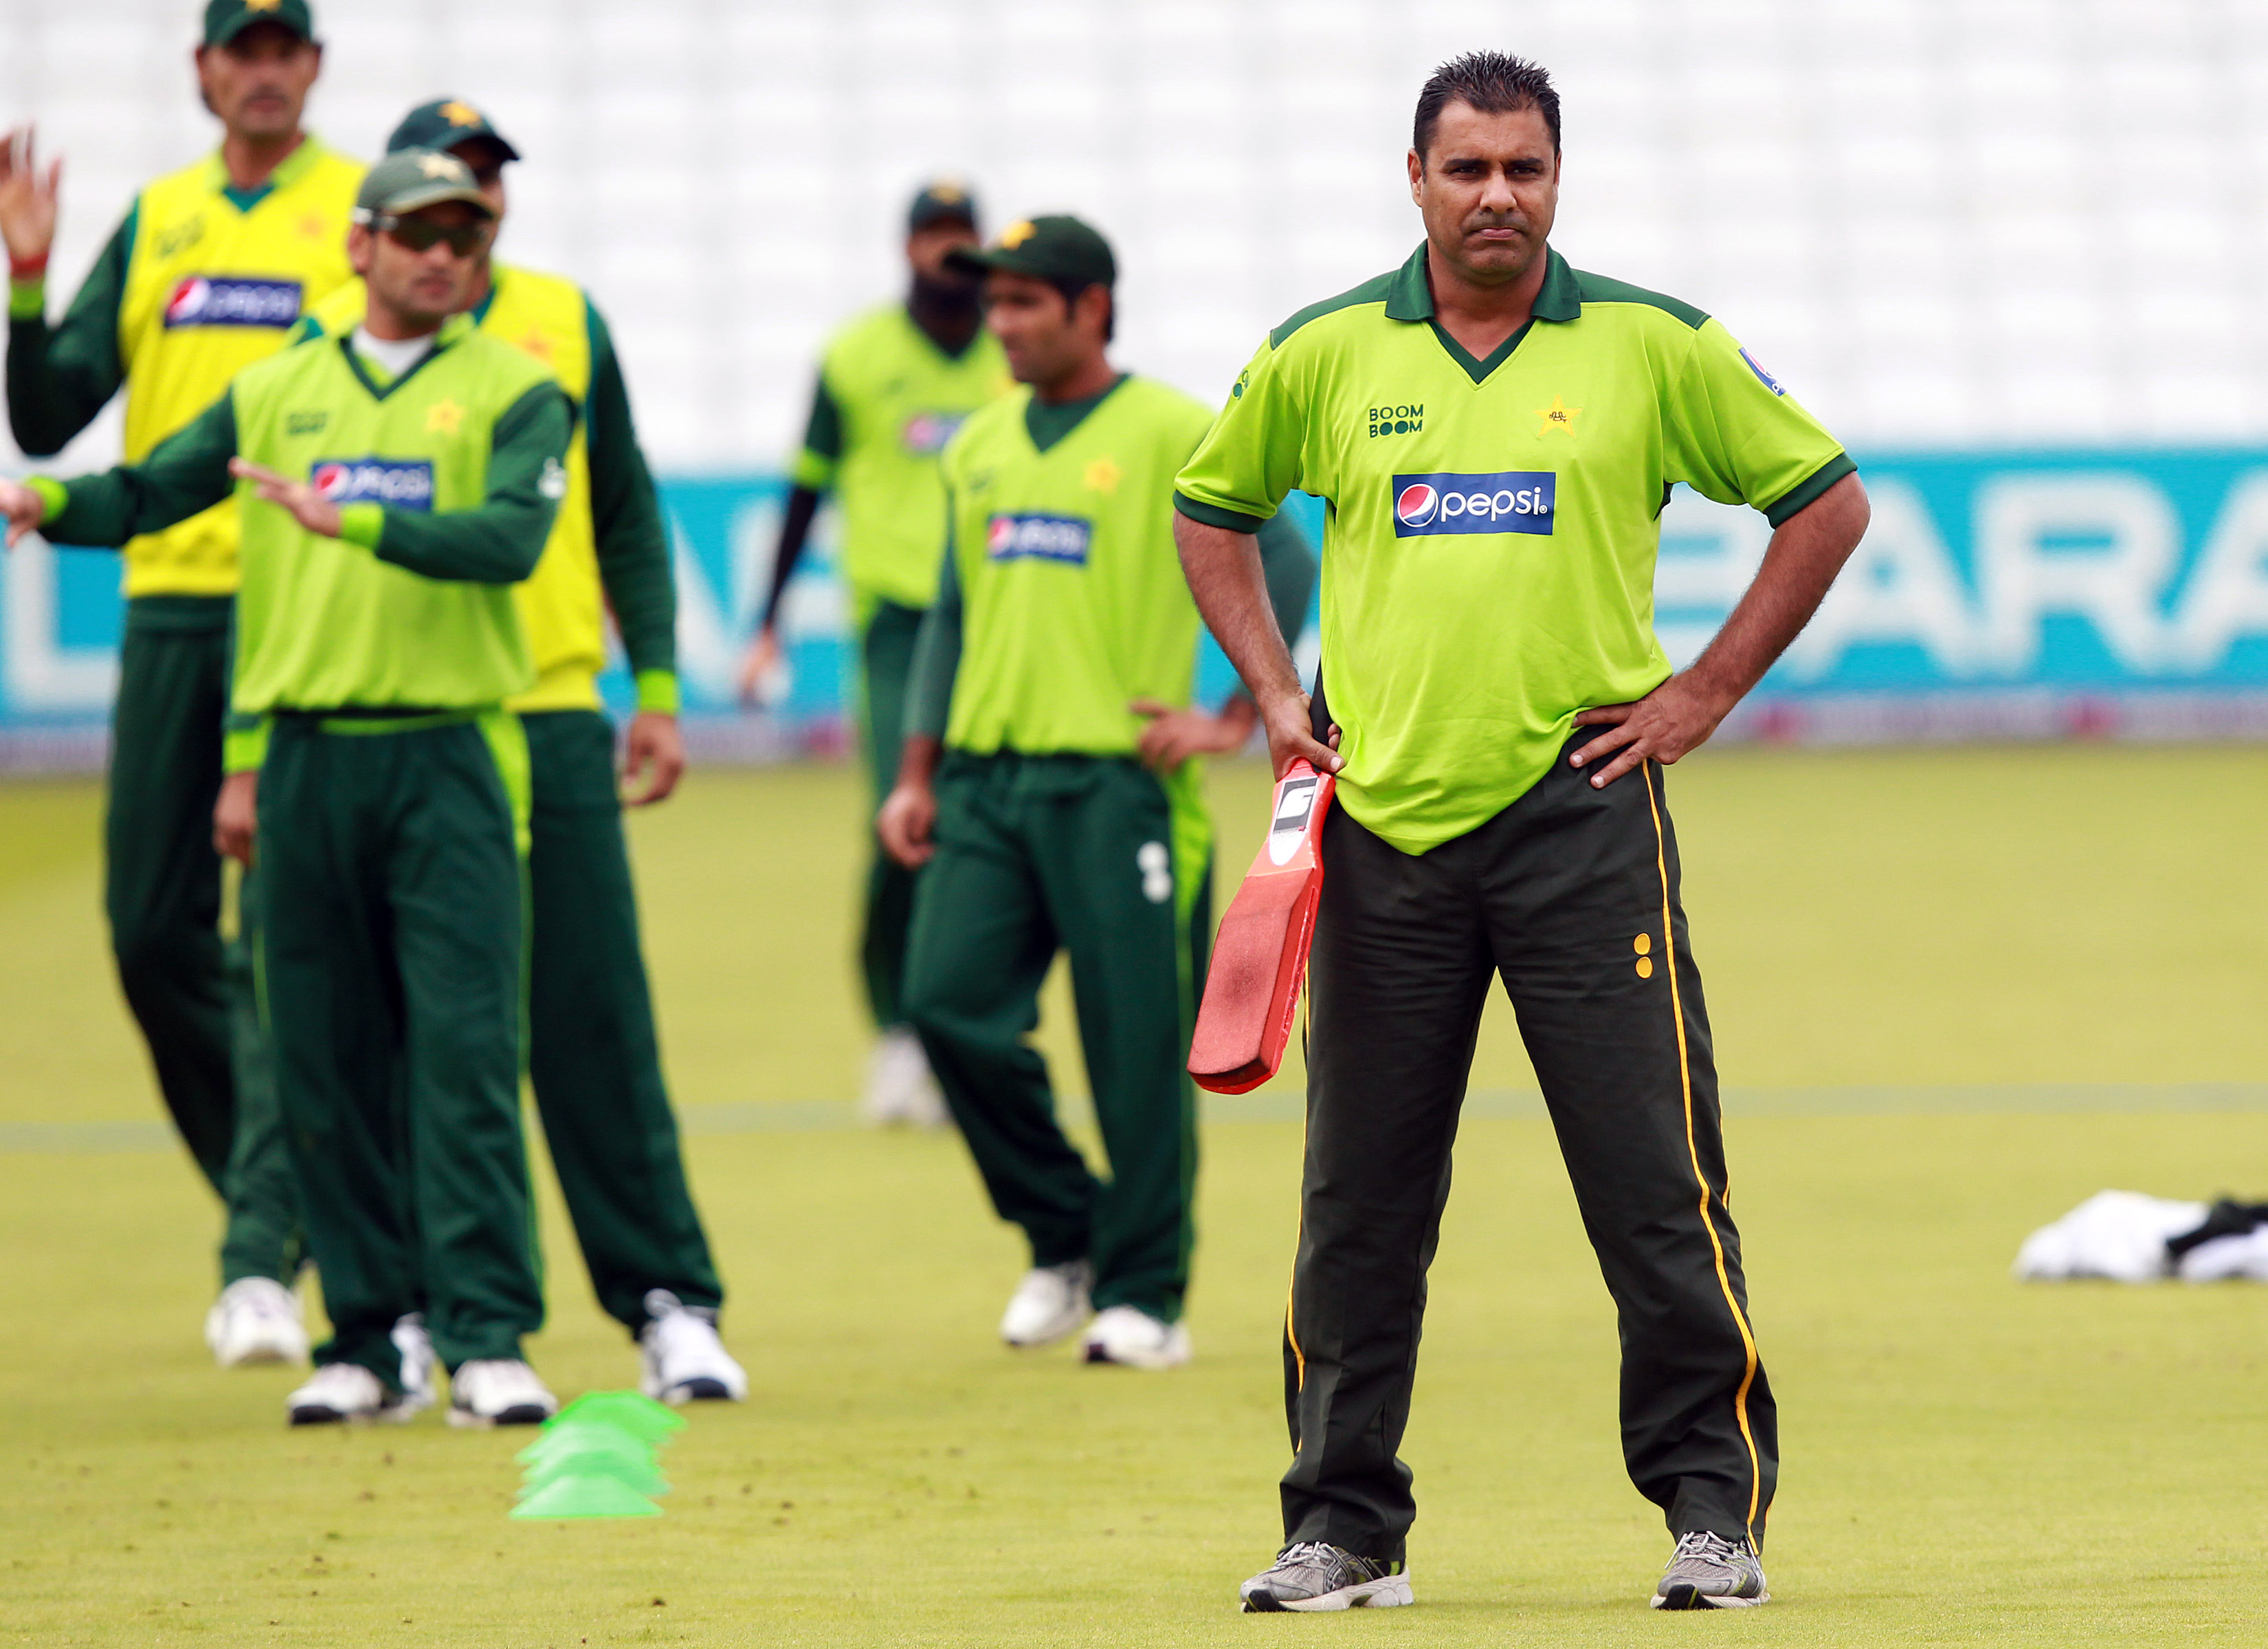 Waqar Younis would have made a better coach, believes Mohammad Yousuf